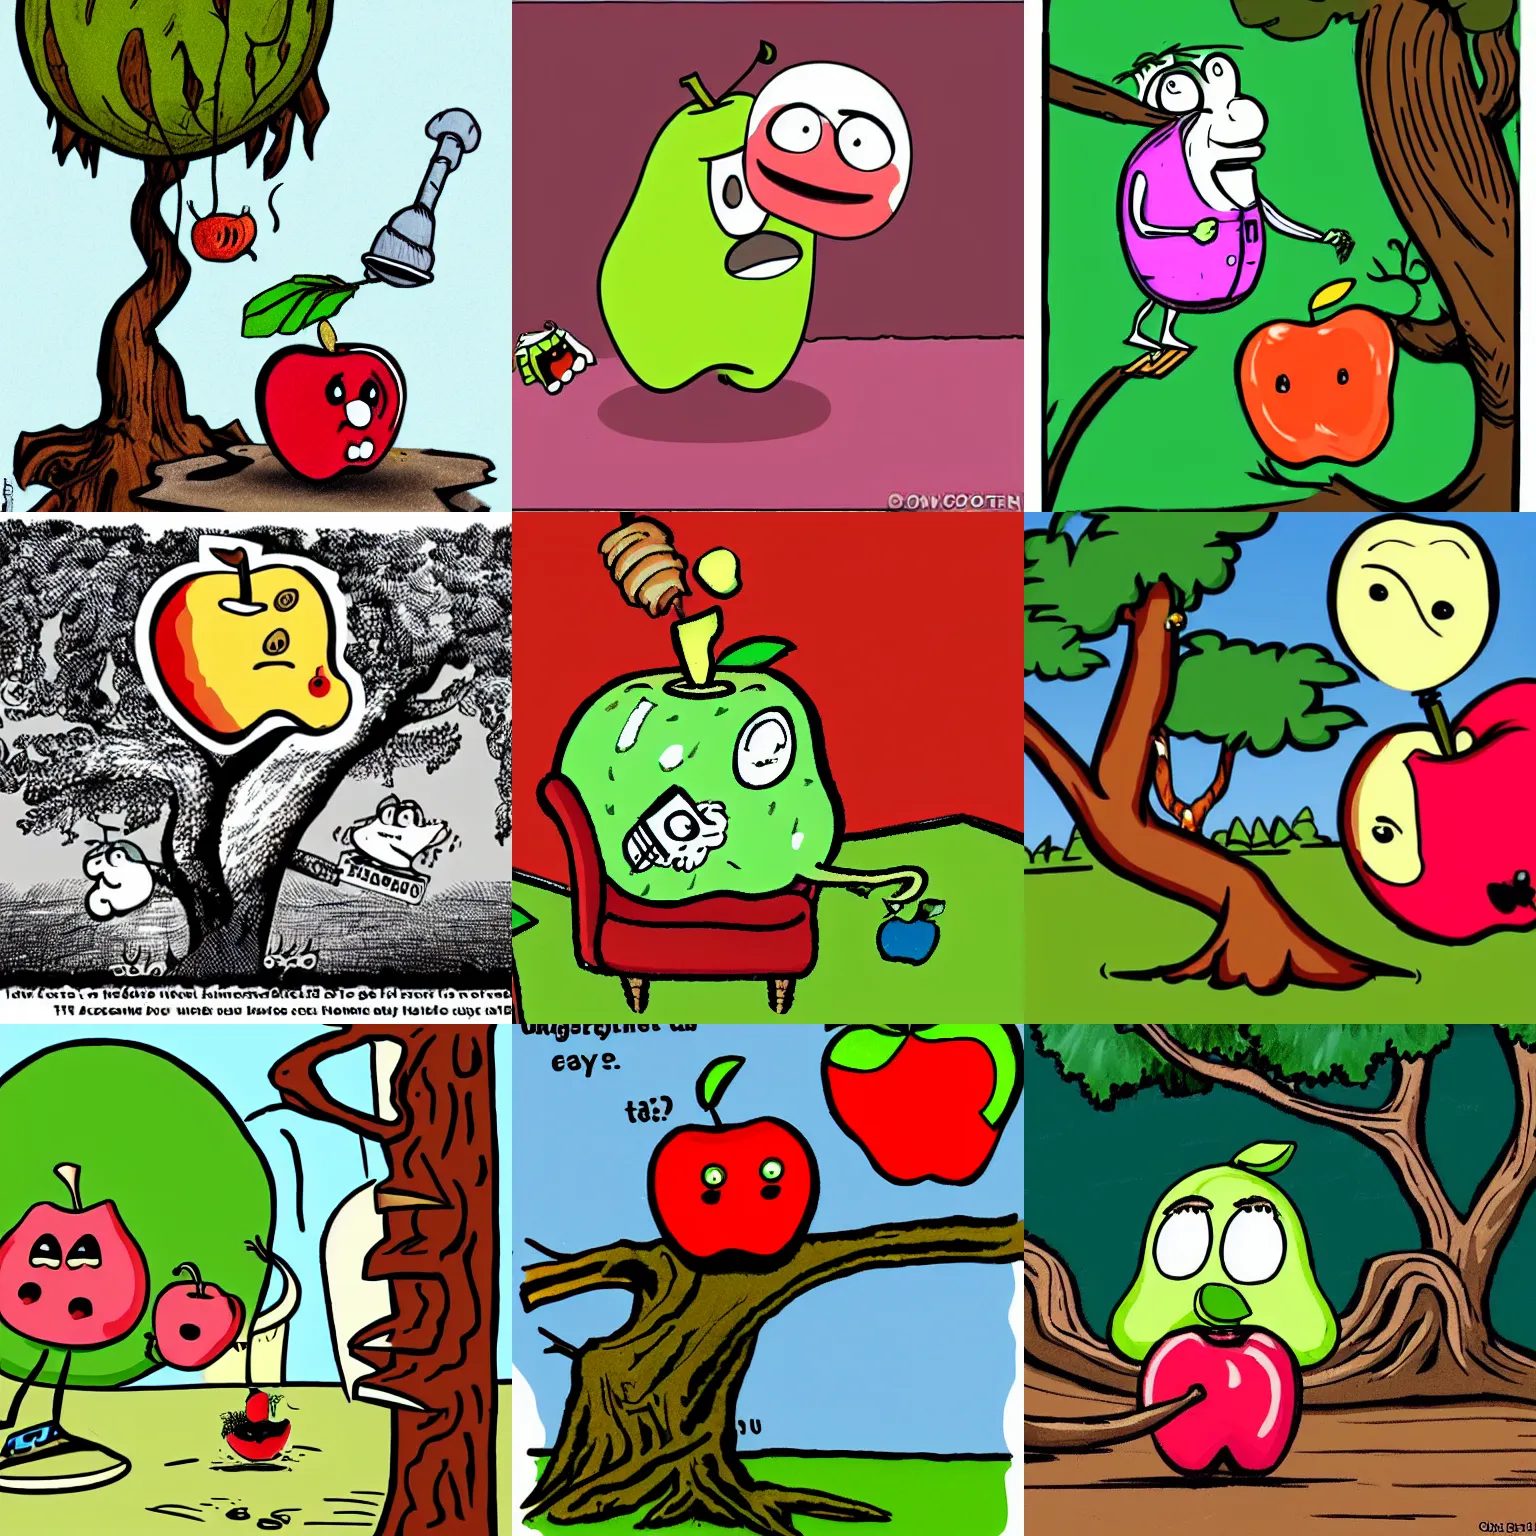 Prompt: a funny cartoon apple that is dressed like a stoner, taking a huge hit off a bong. The apple is sitting on a recliner on a tree branch.